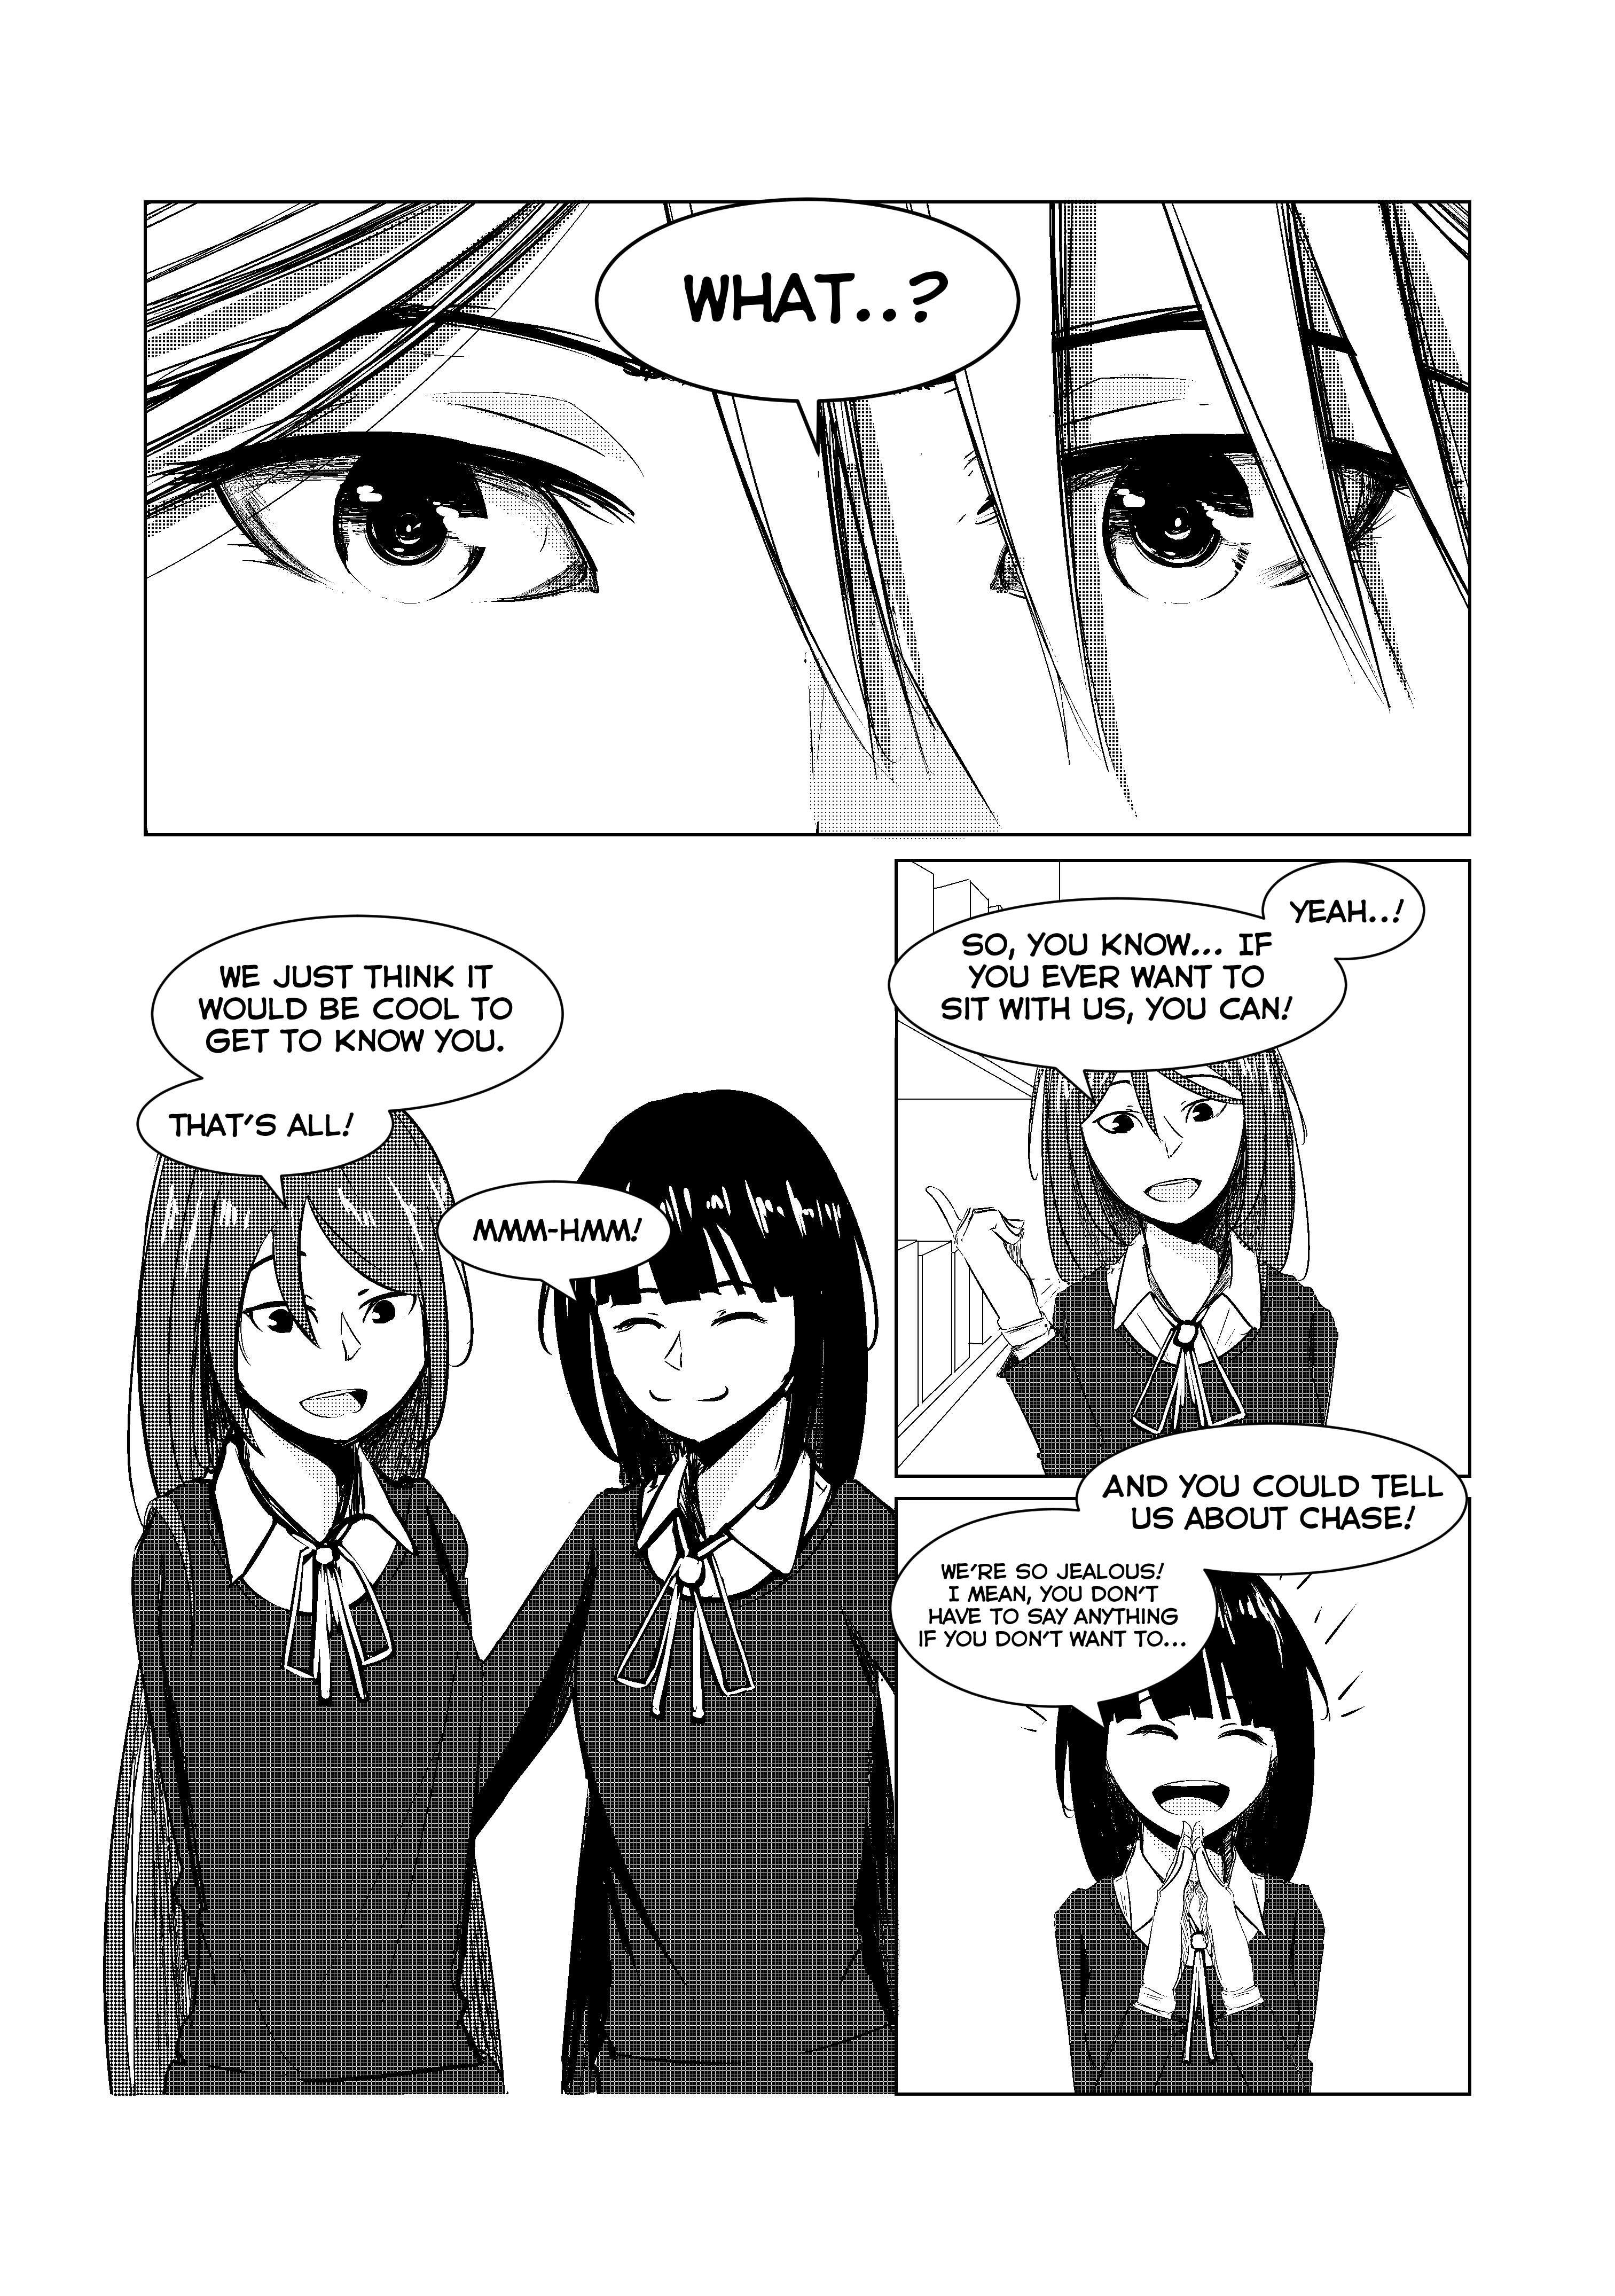 Opposites In Disguise - 1 page 66